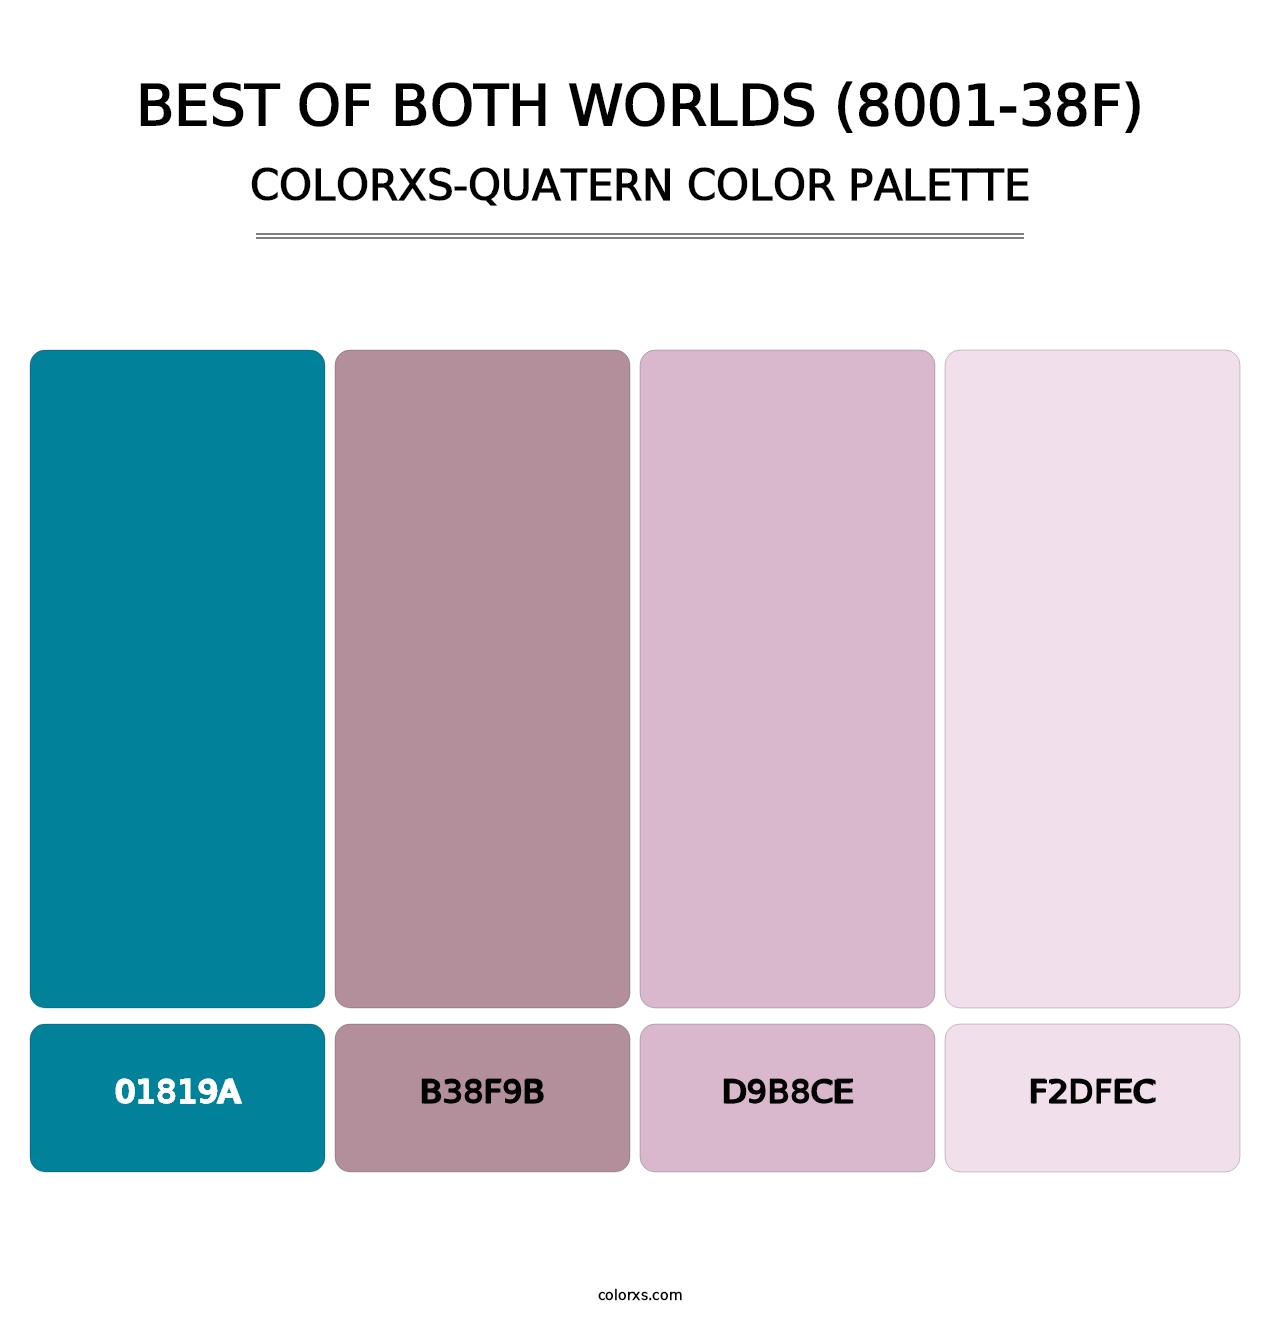 Best of Both Worlds (8001-38F) - Colorxs Quatern Palette